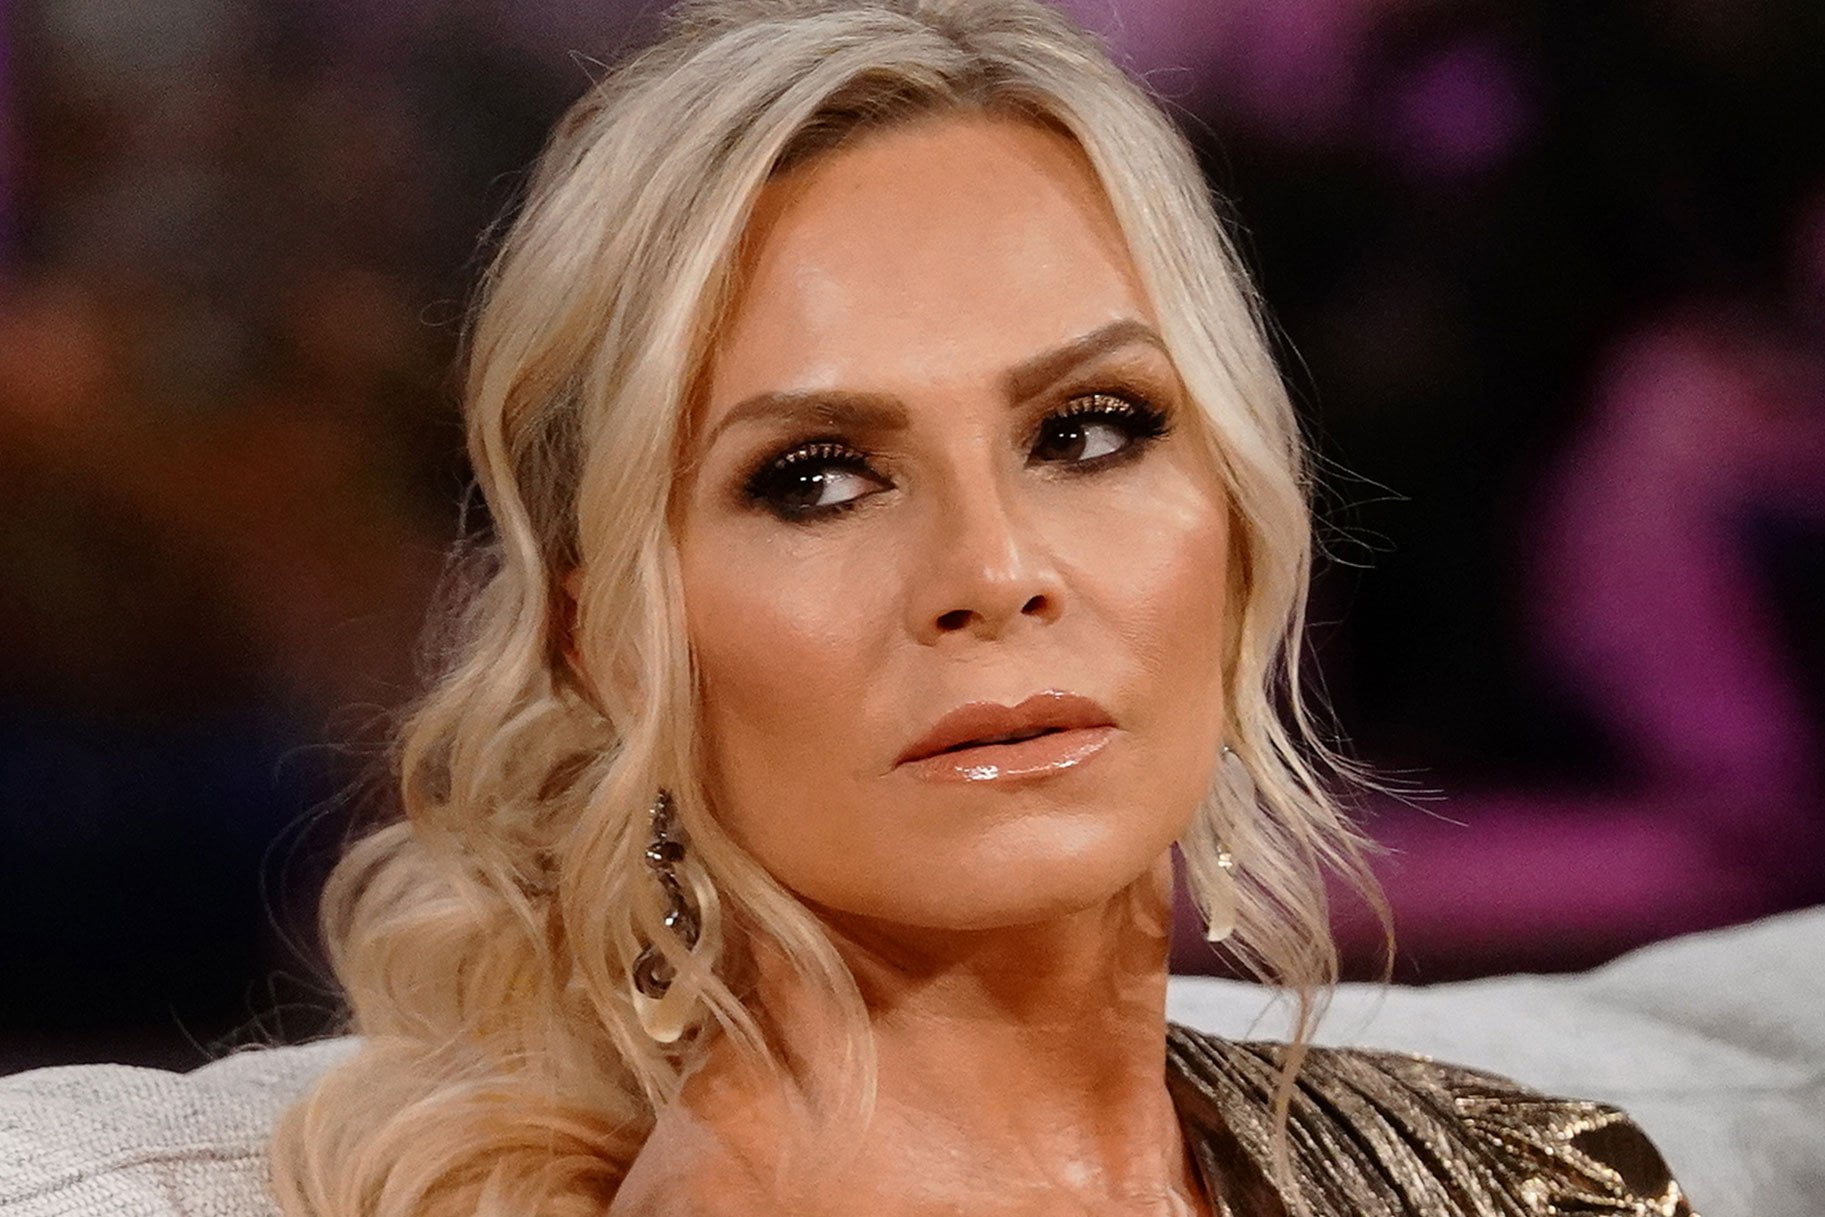 Tamra Judge Would Love To Return To RHOC – She Reportedly Thinks The Show Is A ‘Hot Mess’ Without Her